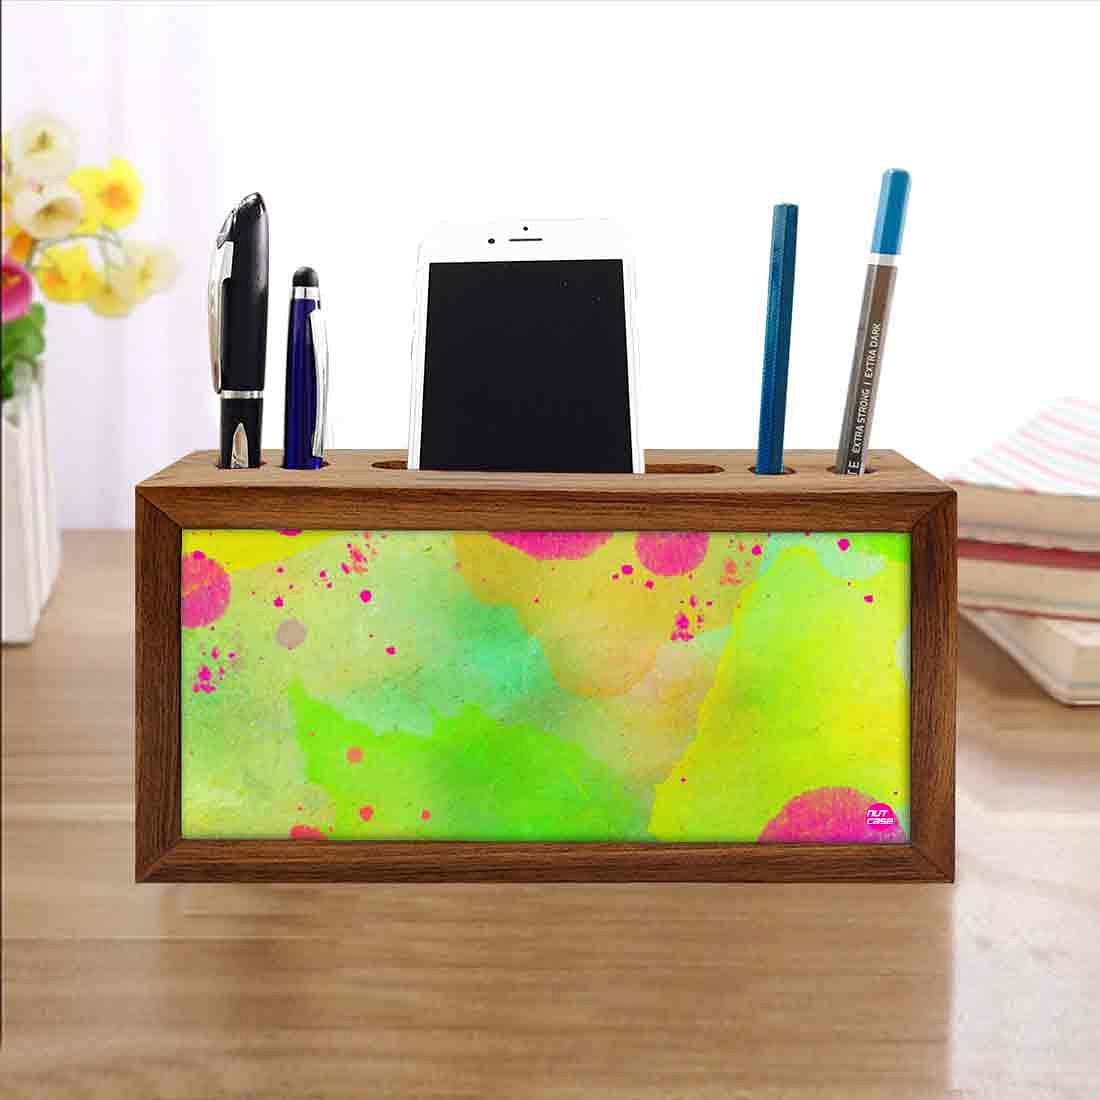 Wooden Stationery Organizer Pen and Mobile Stand Holder - Watercolors Paint Nutcase